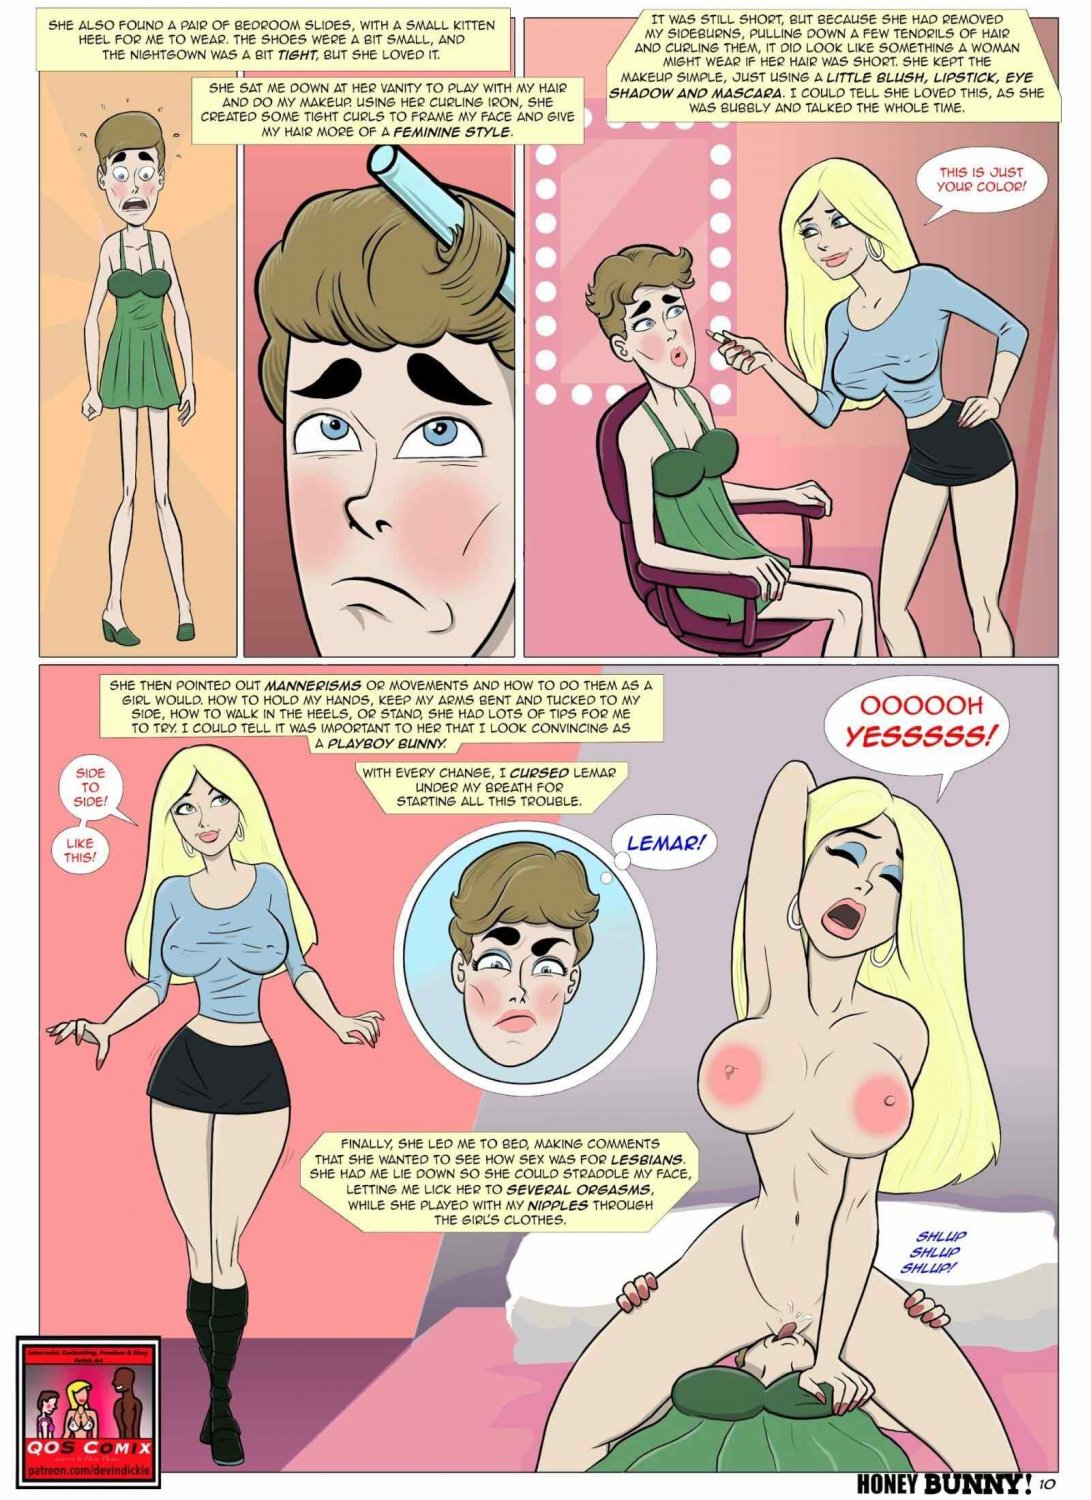 Cross dressing sph comics - Porn Videos and Photos pic pic